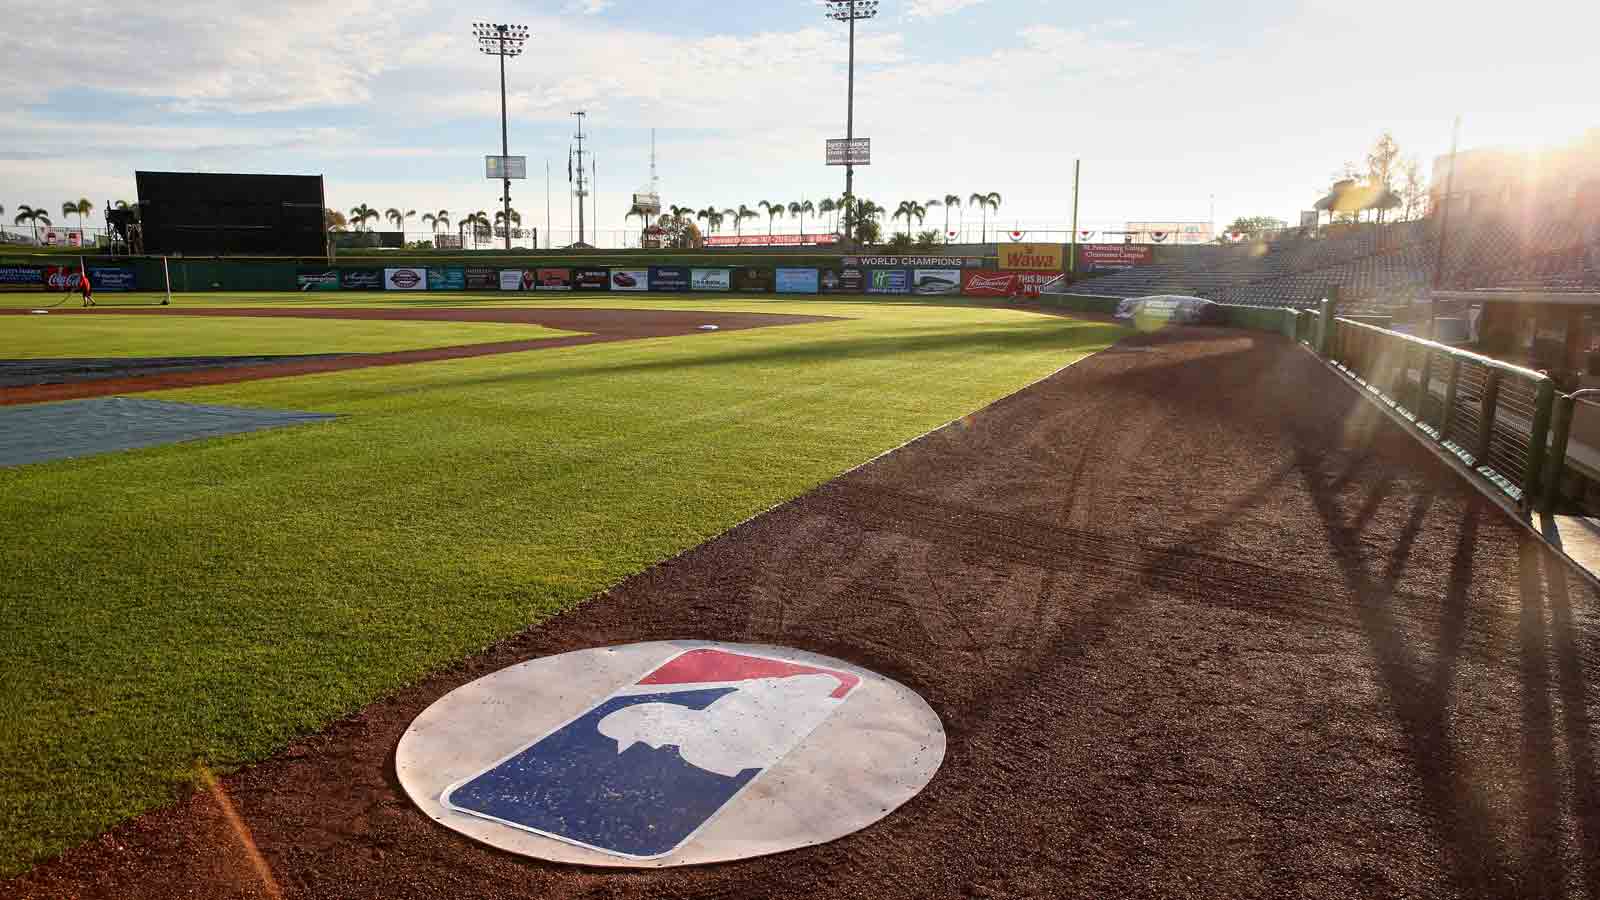 Giants Spring Training report 2022